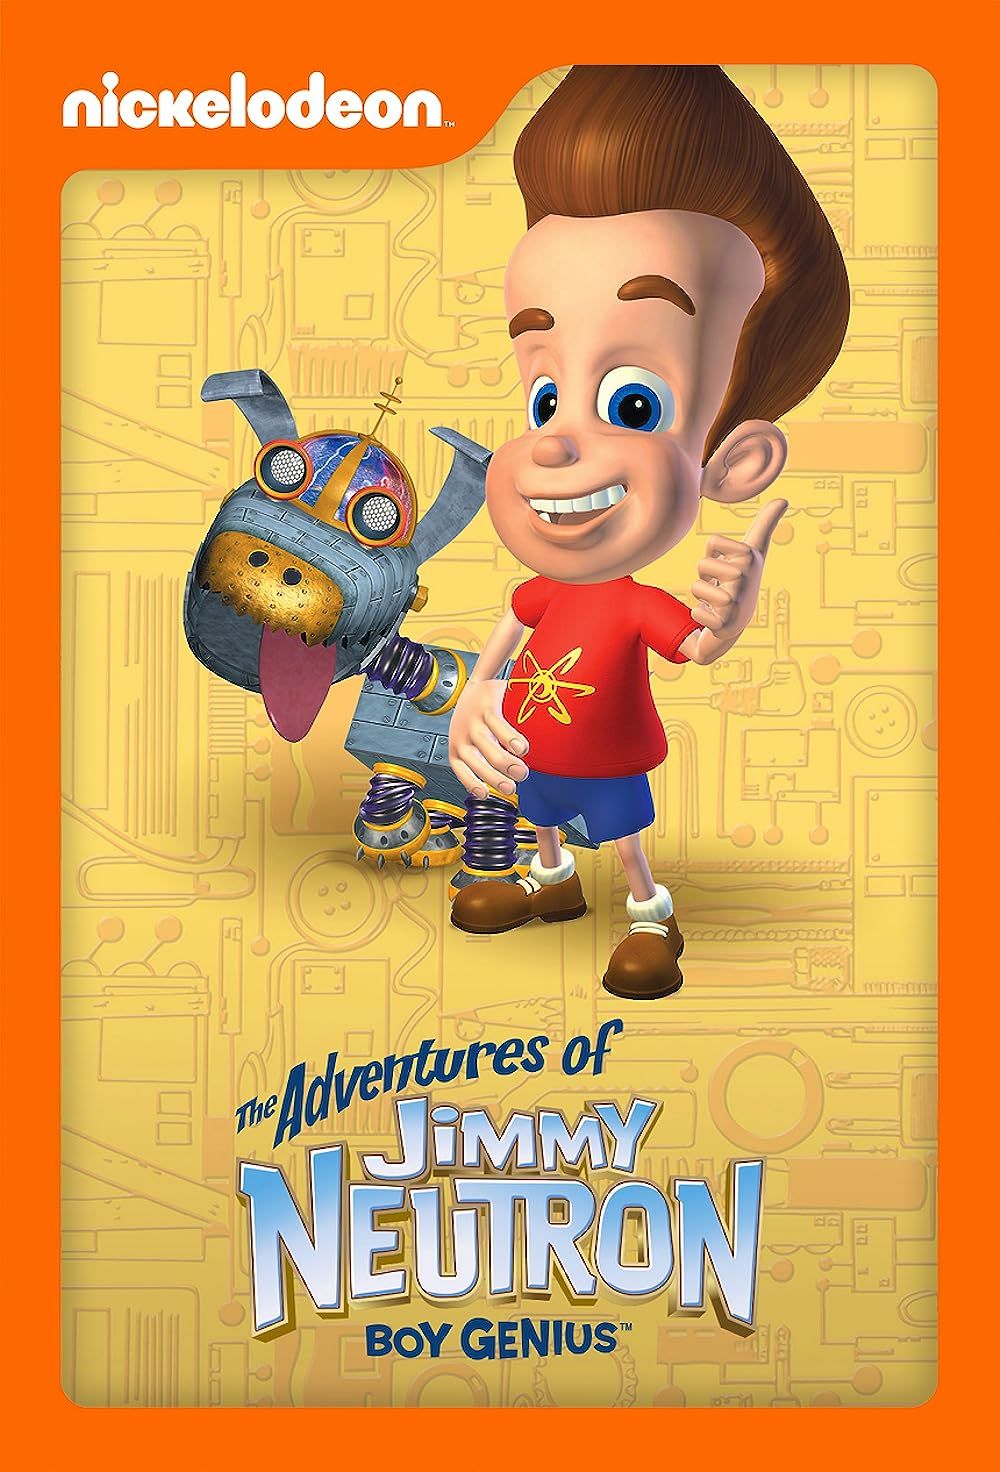 Jimmy Neutron and his robot dog in The Adventures of Jimmy Neutron, Boy Genius (2002)